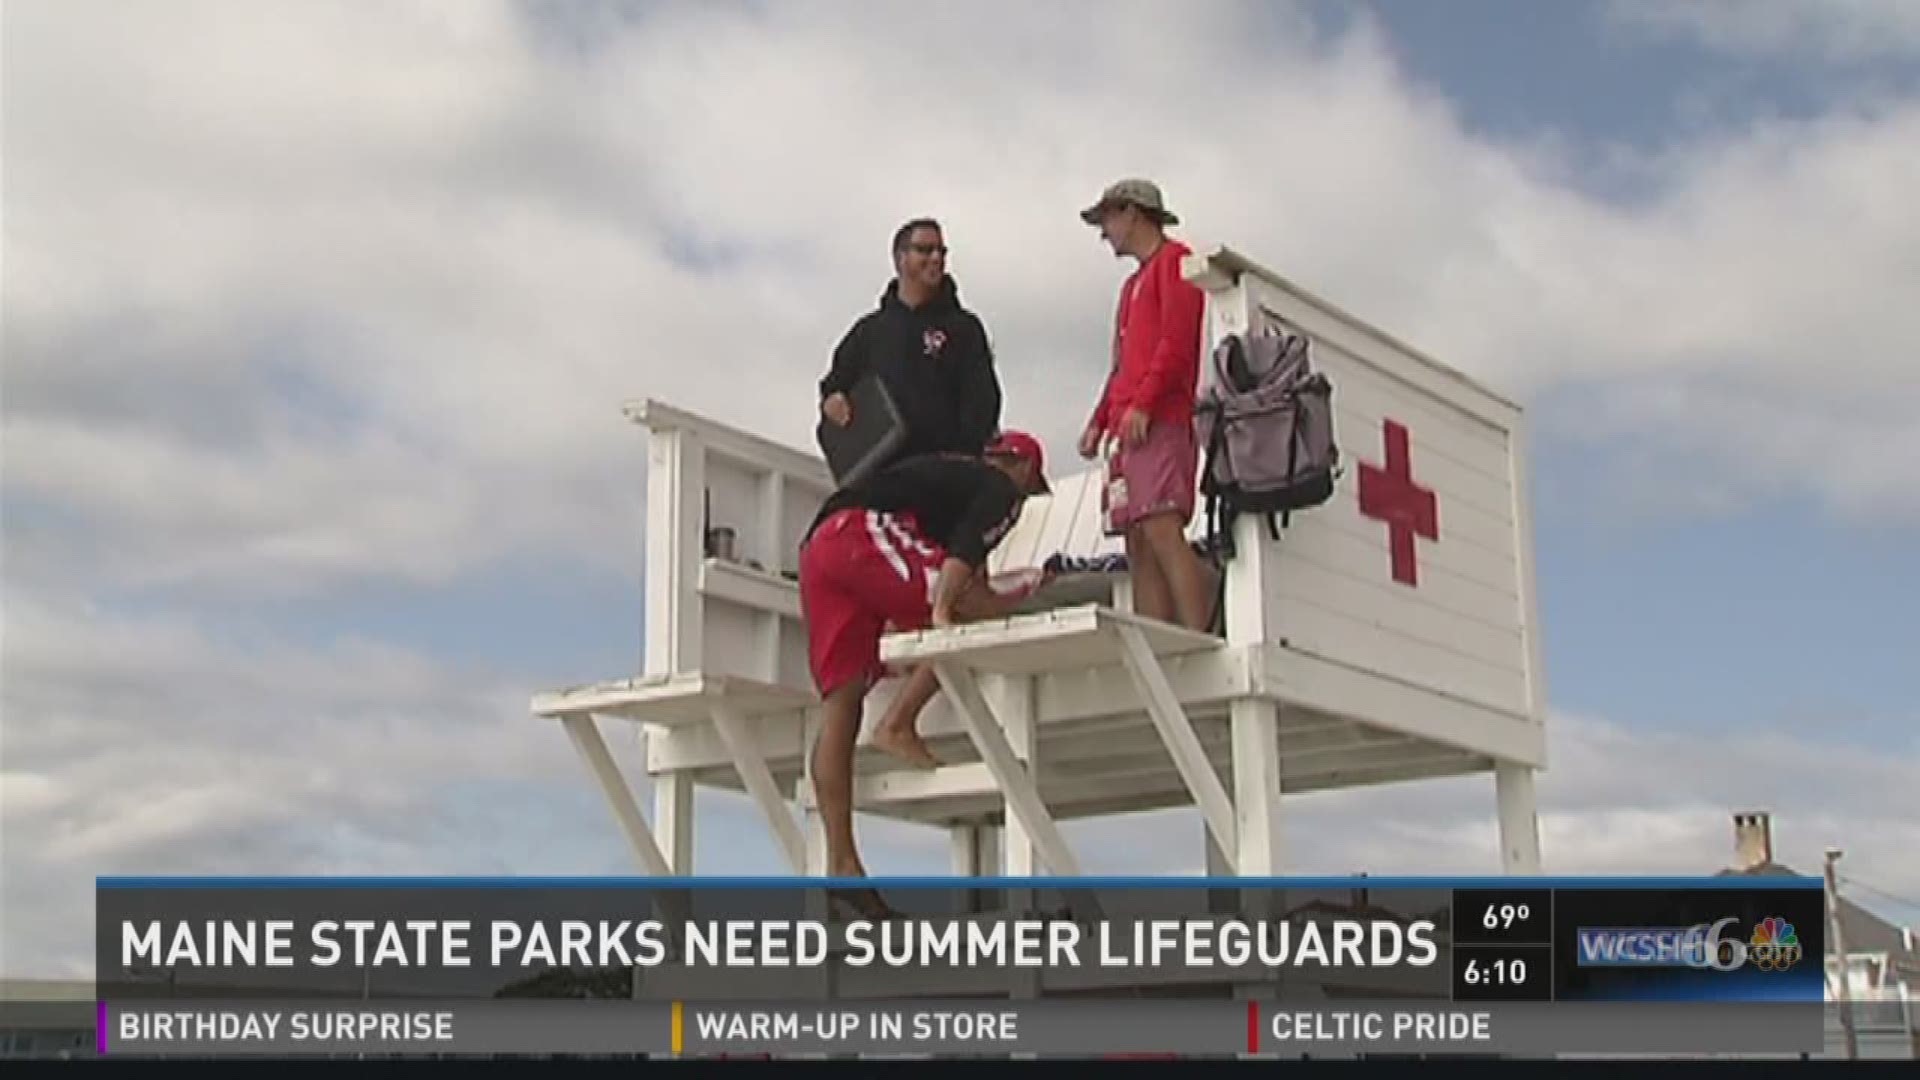 Maine state parks need summer lifeguards